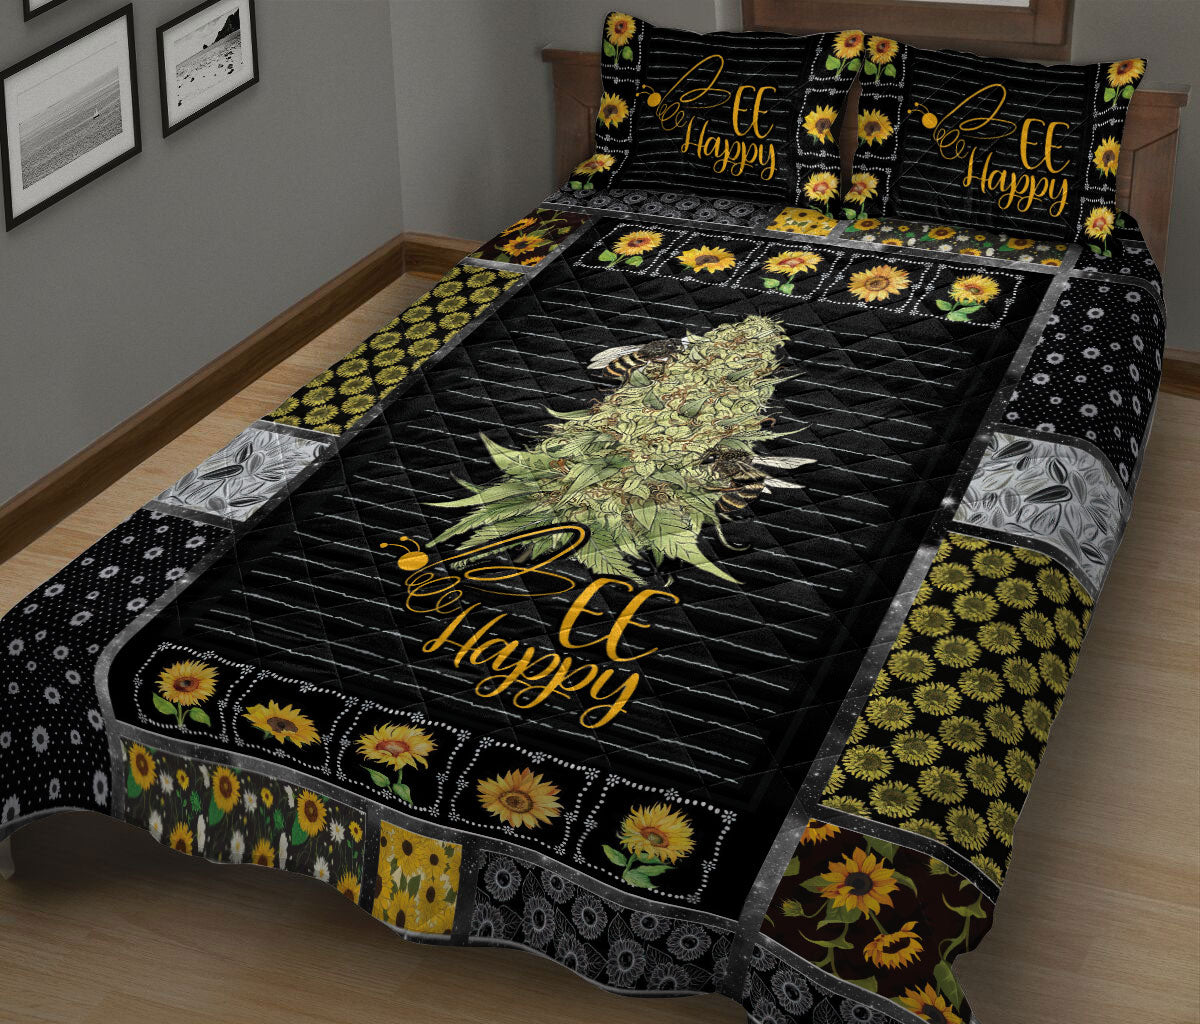 Ohaprints-Quilt-Bed-Set-Pillowcase-Bee-Happy-Sunflower-Yellow-Floral-Patchwork-Pattern-Unique-Gift-Blanket-Bedspread-Bedding-2423-King (90'' x 100'')